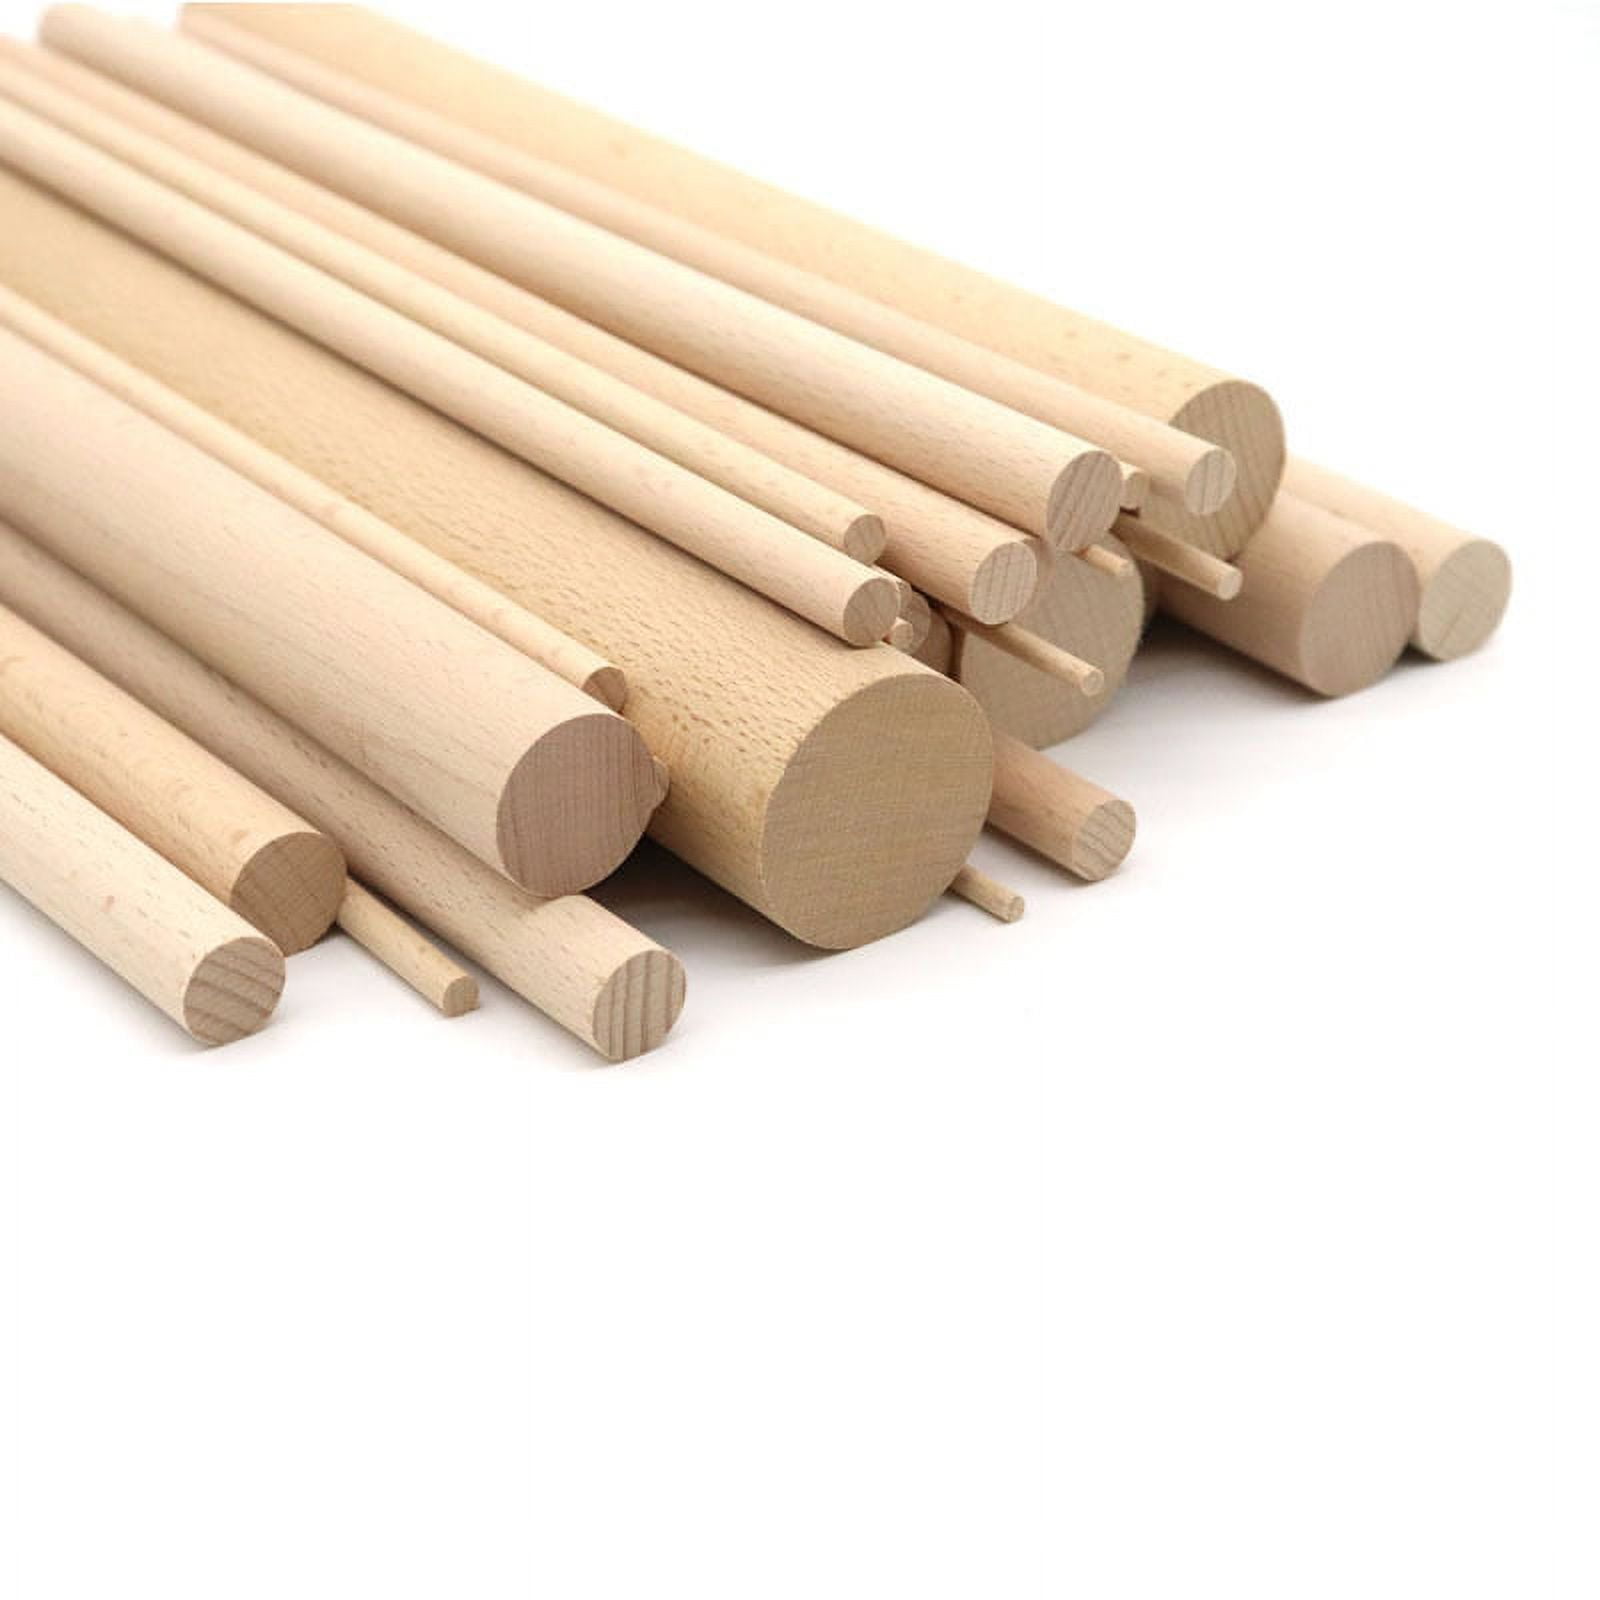 20 Pcs Wooden Dowel Rods for Craft, Unfinished Qatar